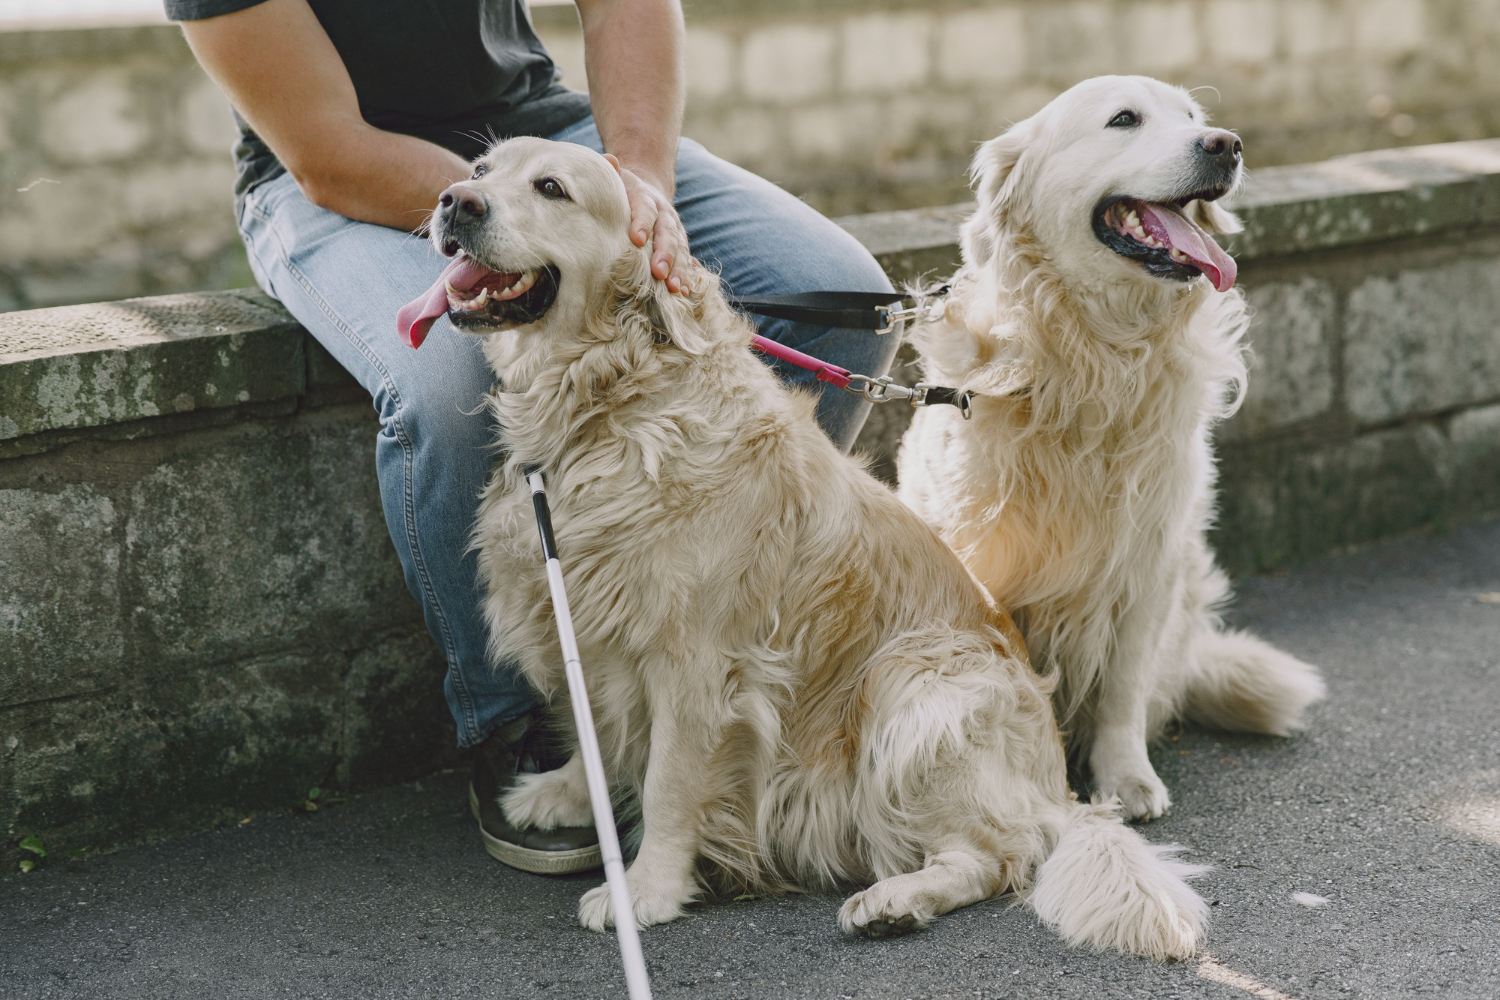 Are golden retrievers good therapy dogs?